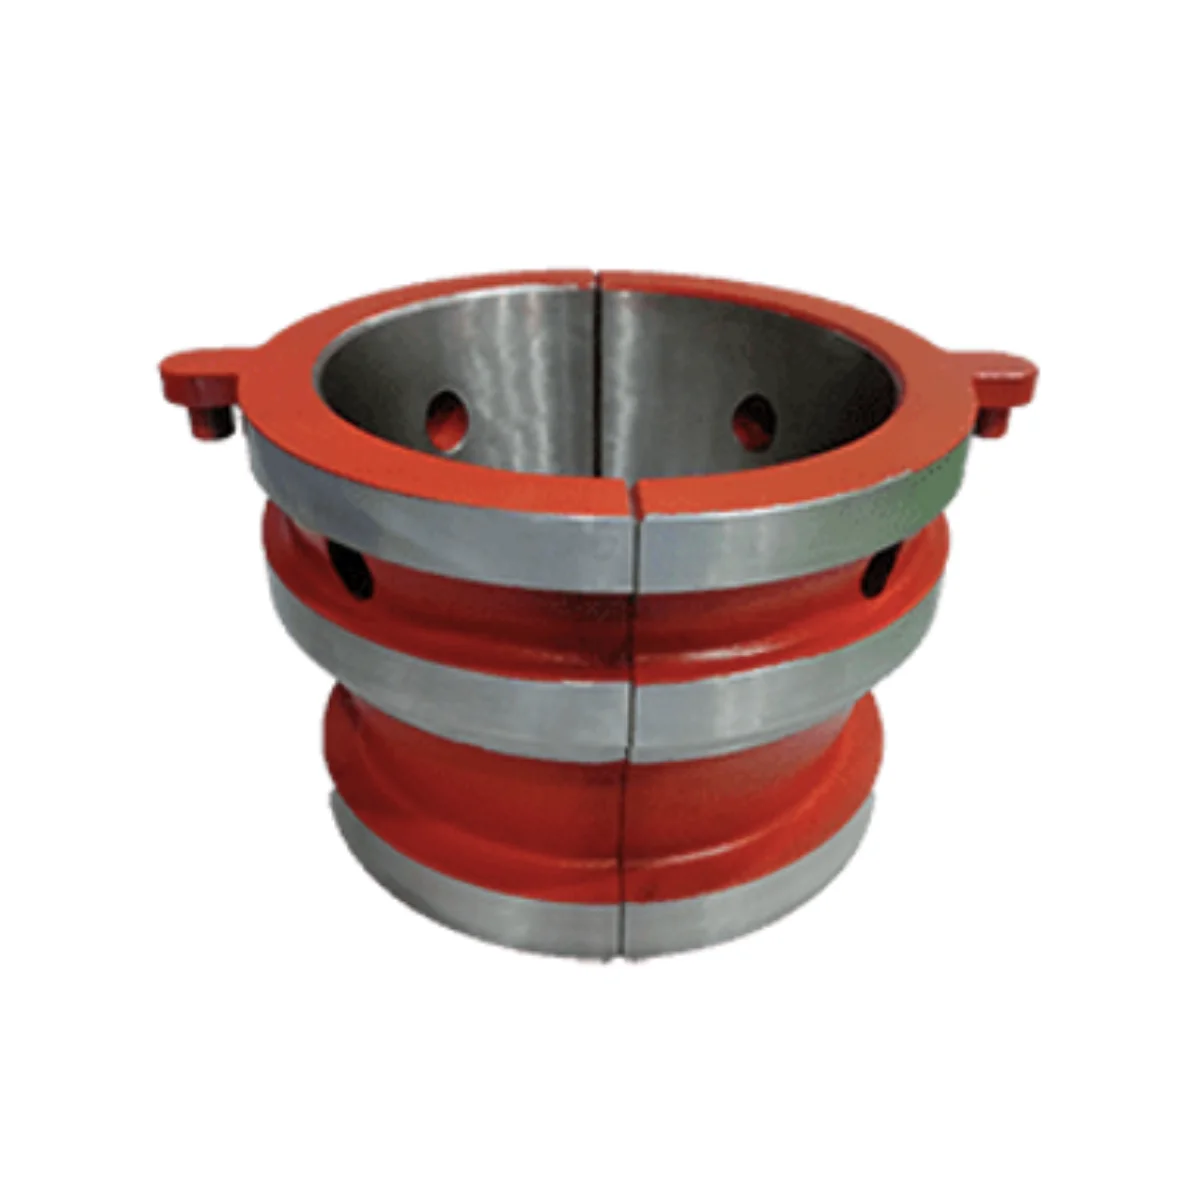 Master Bushing Insert Bowl No.2, an integral part of oilfield handling tools. This insert bowl is specifically designed to fit within the master bushing, contributing to the stability and support of the drill string during drilling operations. Its purposeful design ensures effective and safe handling of drilling equipment in the oilfield.